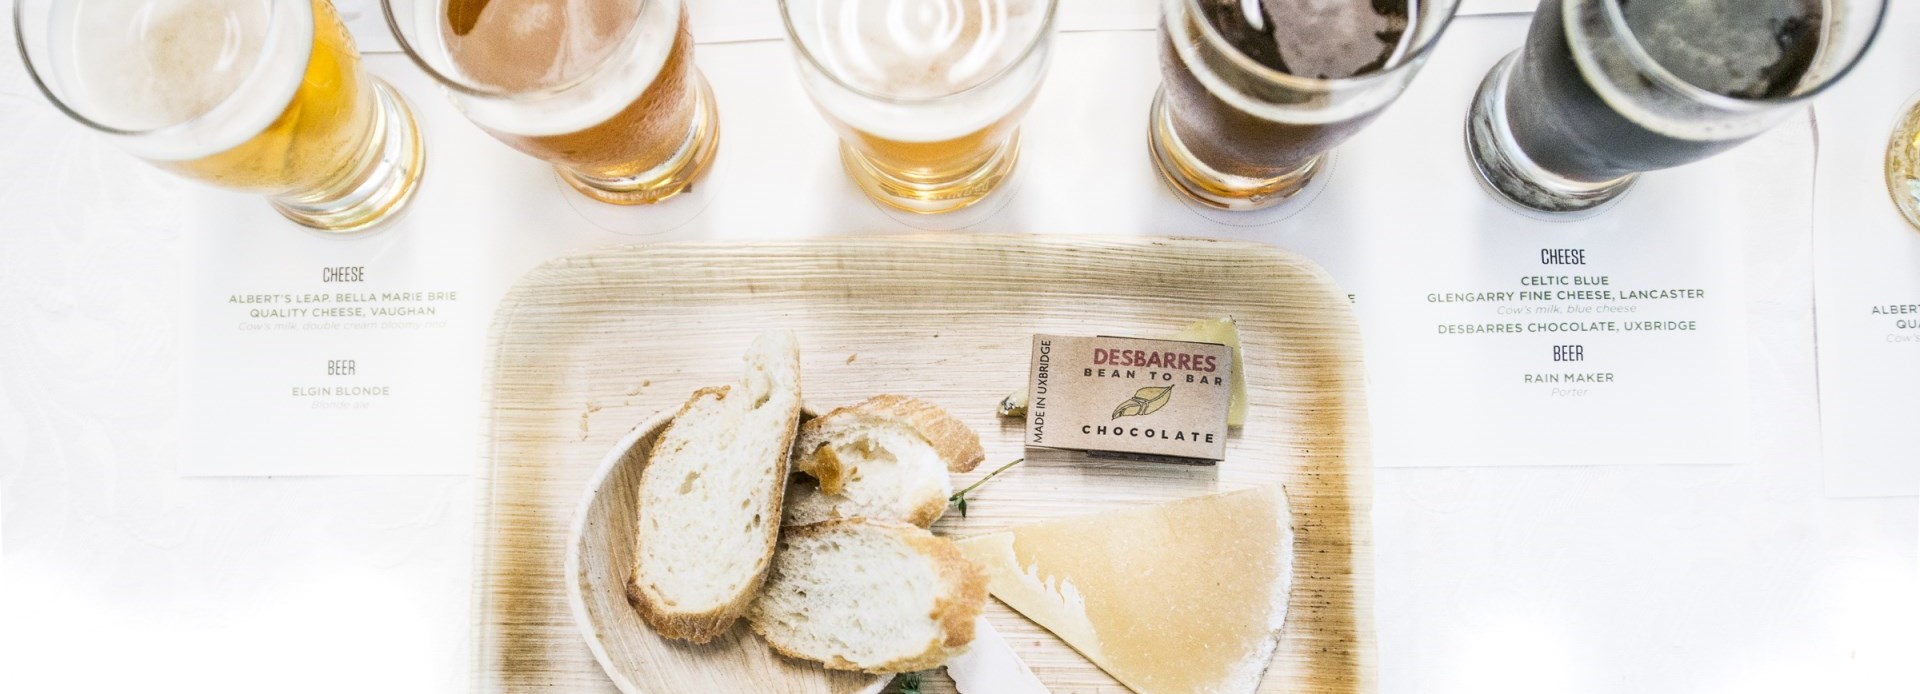 Beer and cheese tray